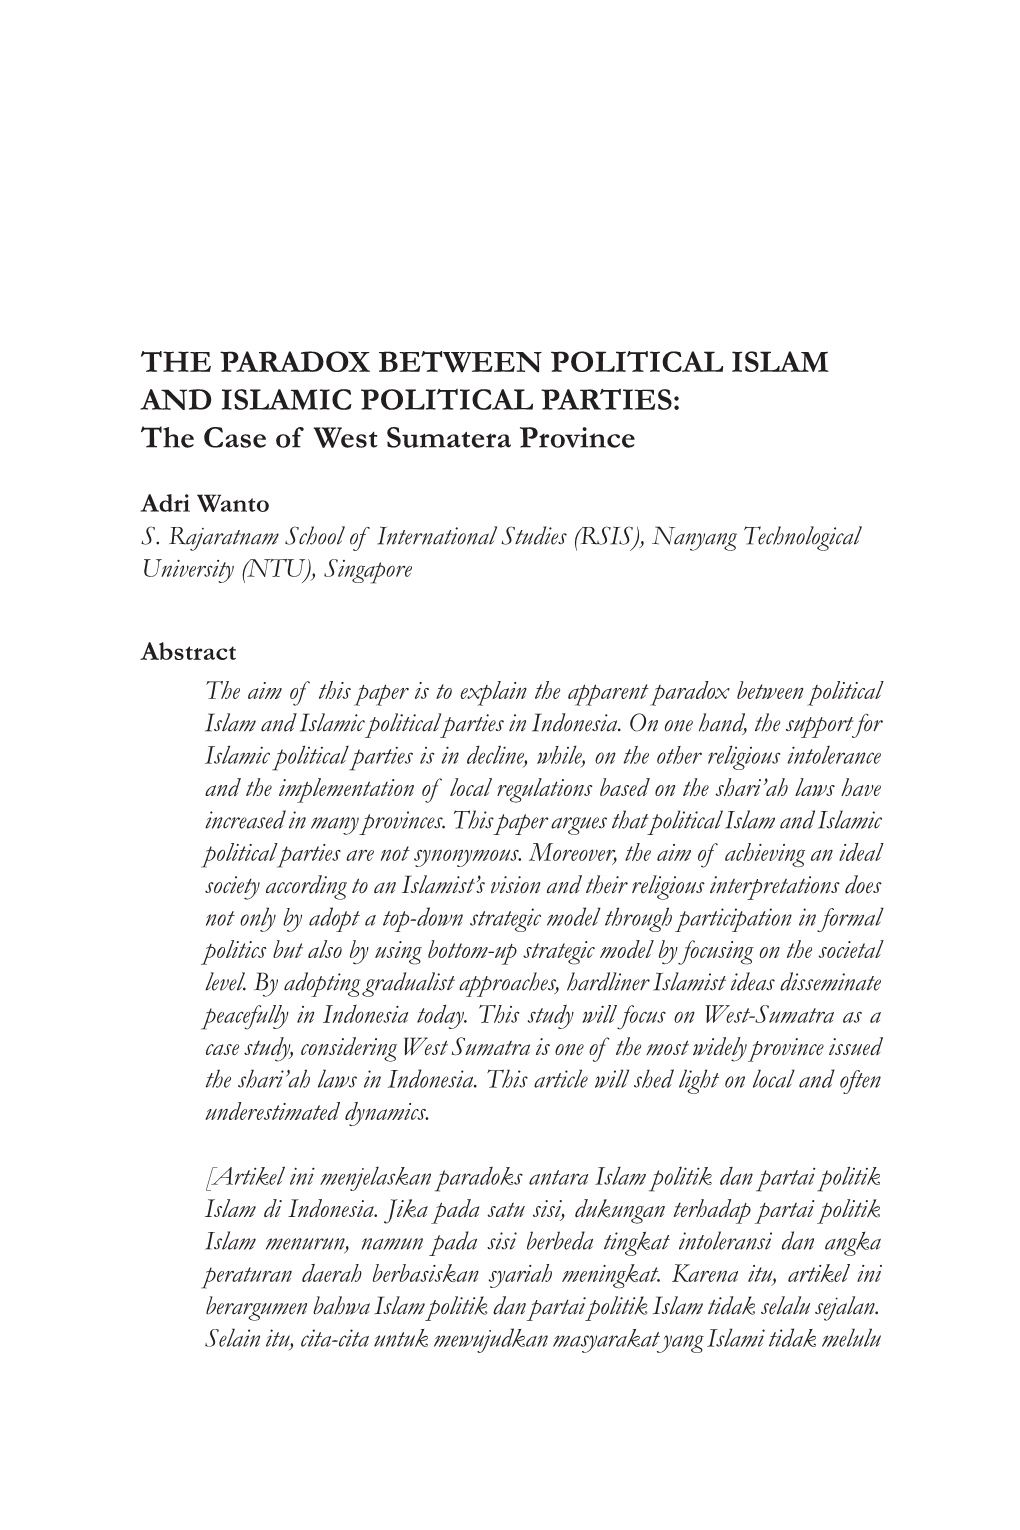 THE PARADOX BETWEEN POLITICAL ISLAM and ISLAMIC POLITICAL PARTIES: the Case of West Sumatera Province